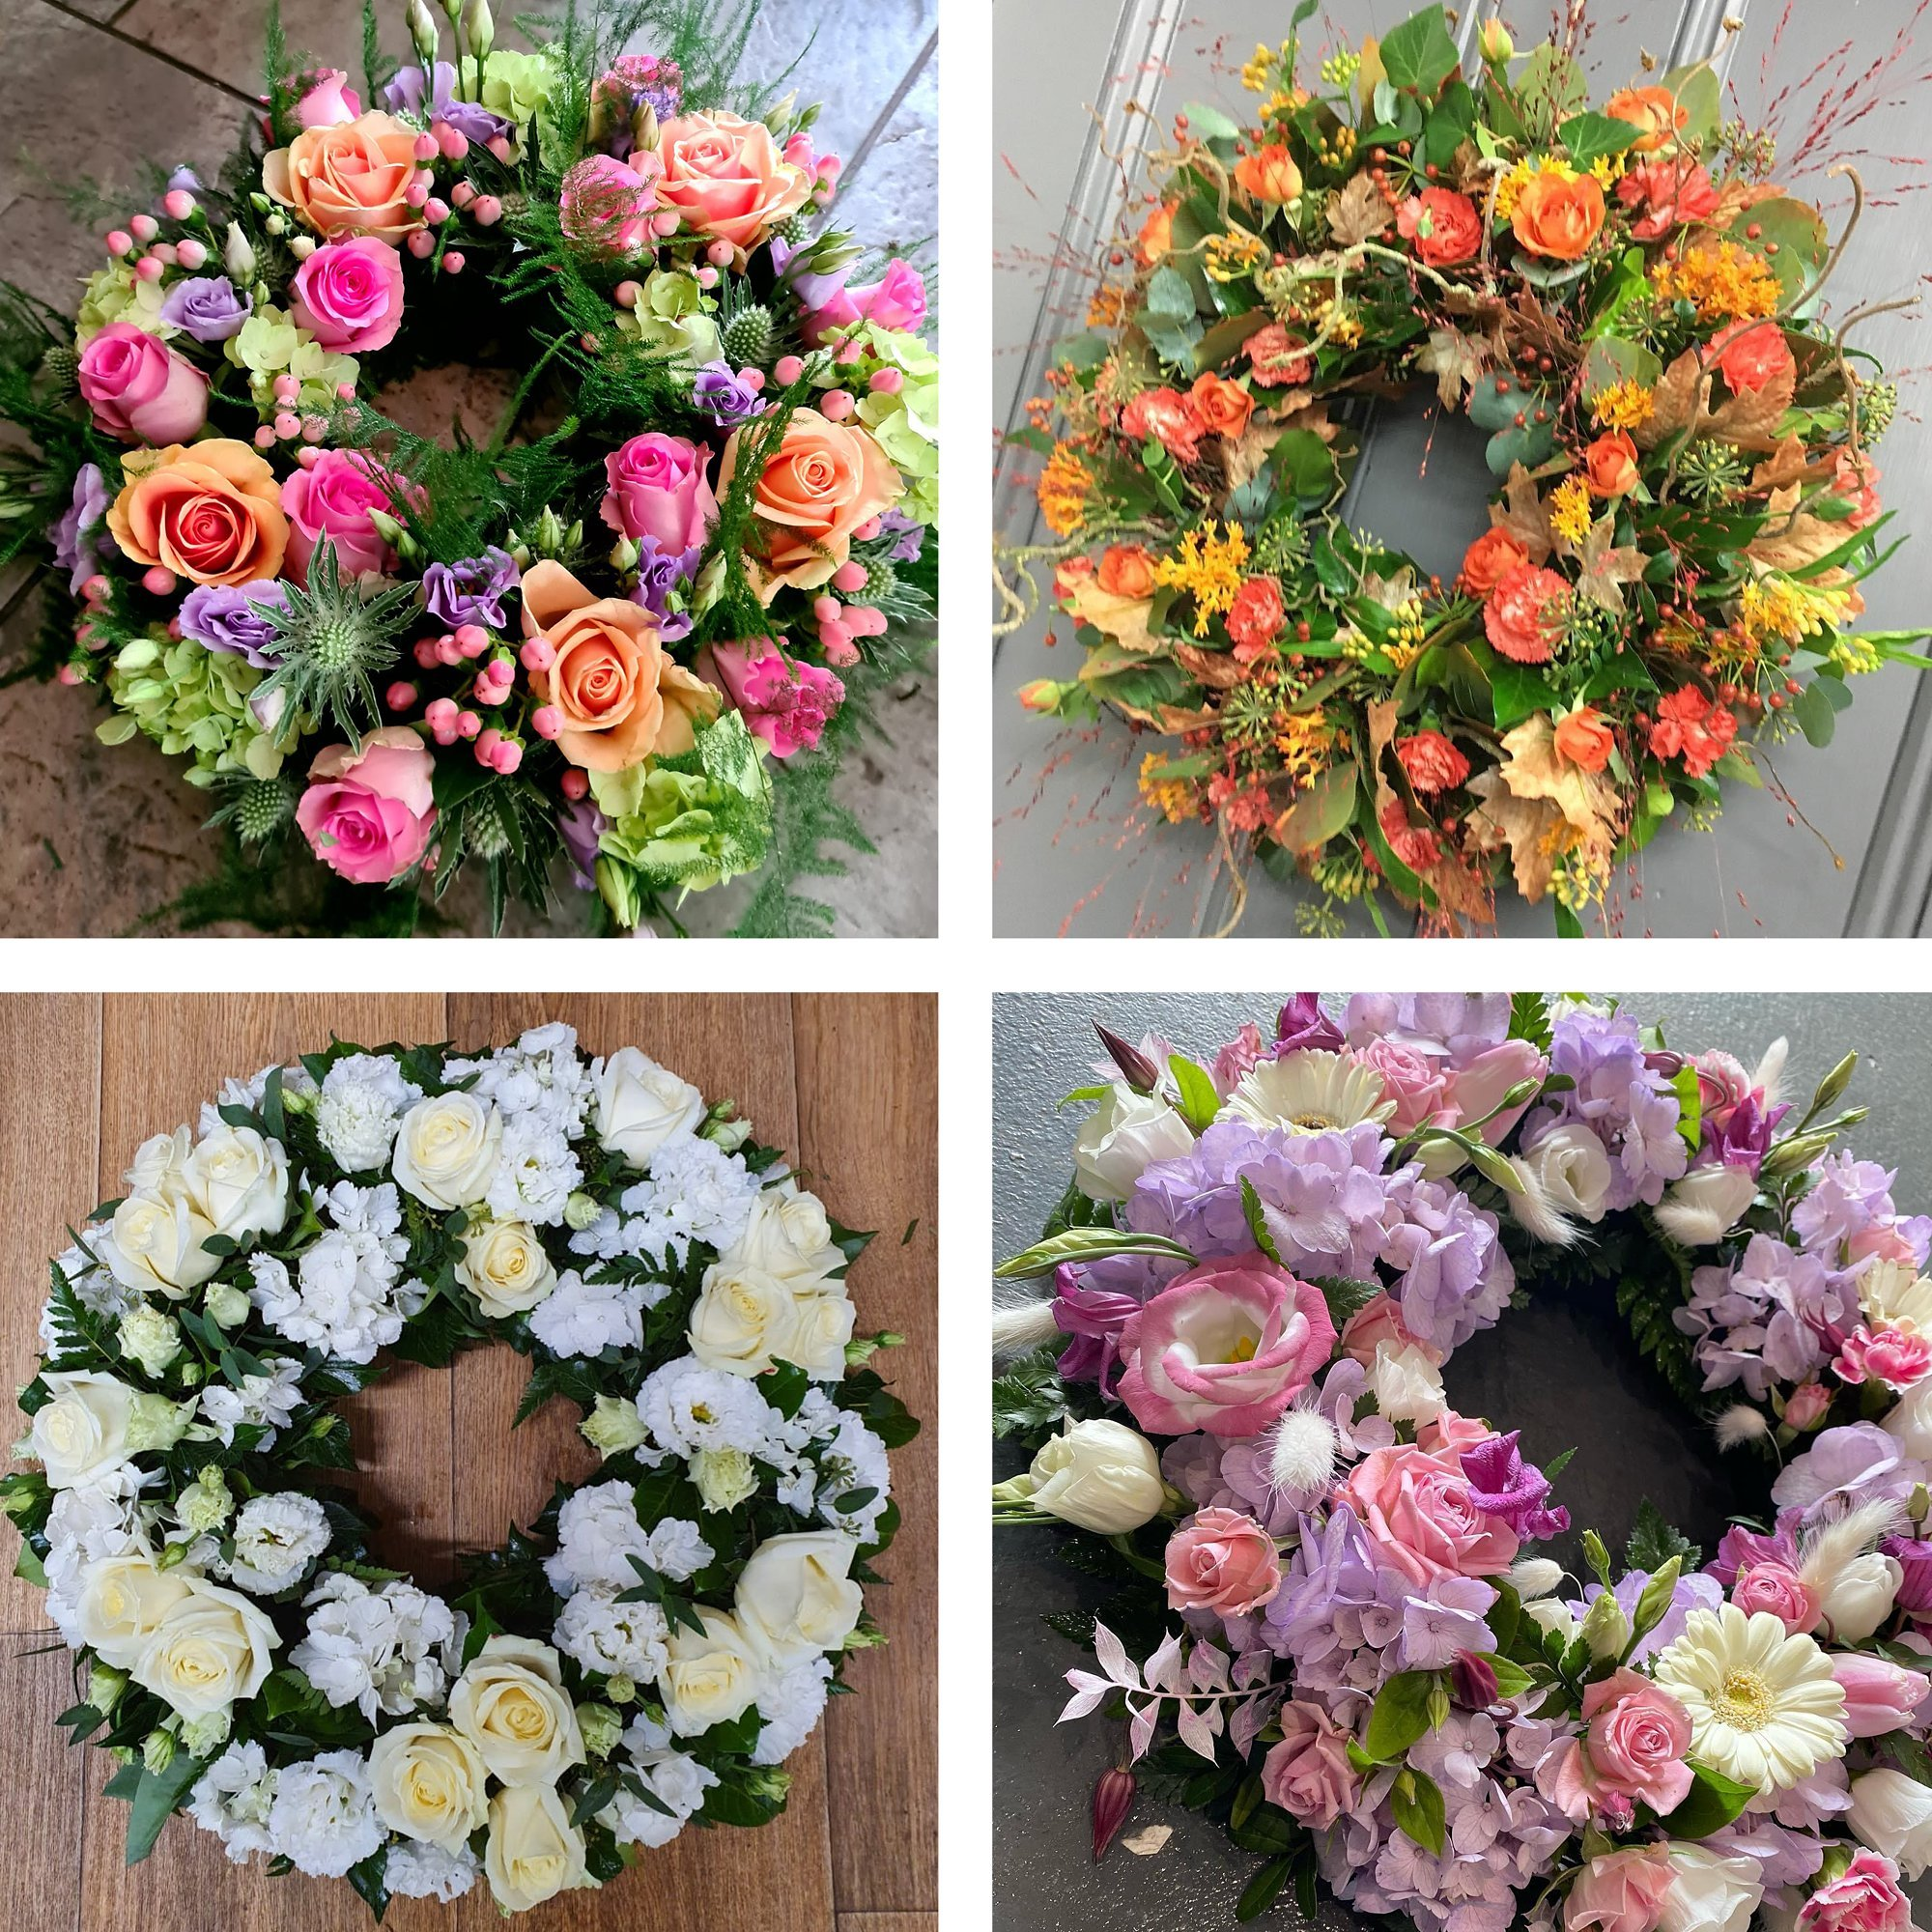 Funeral wreath made with the finest flowers image